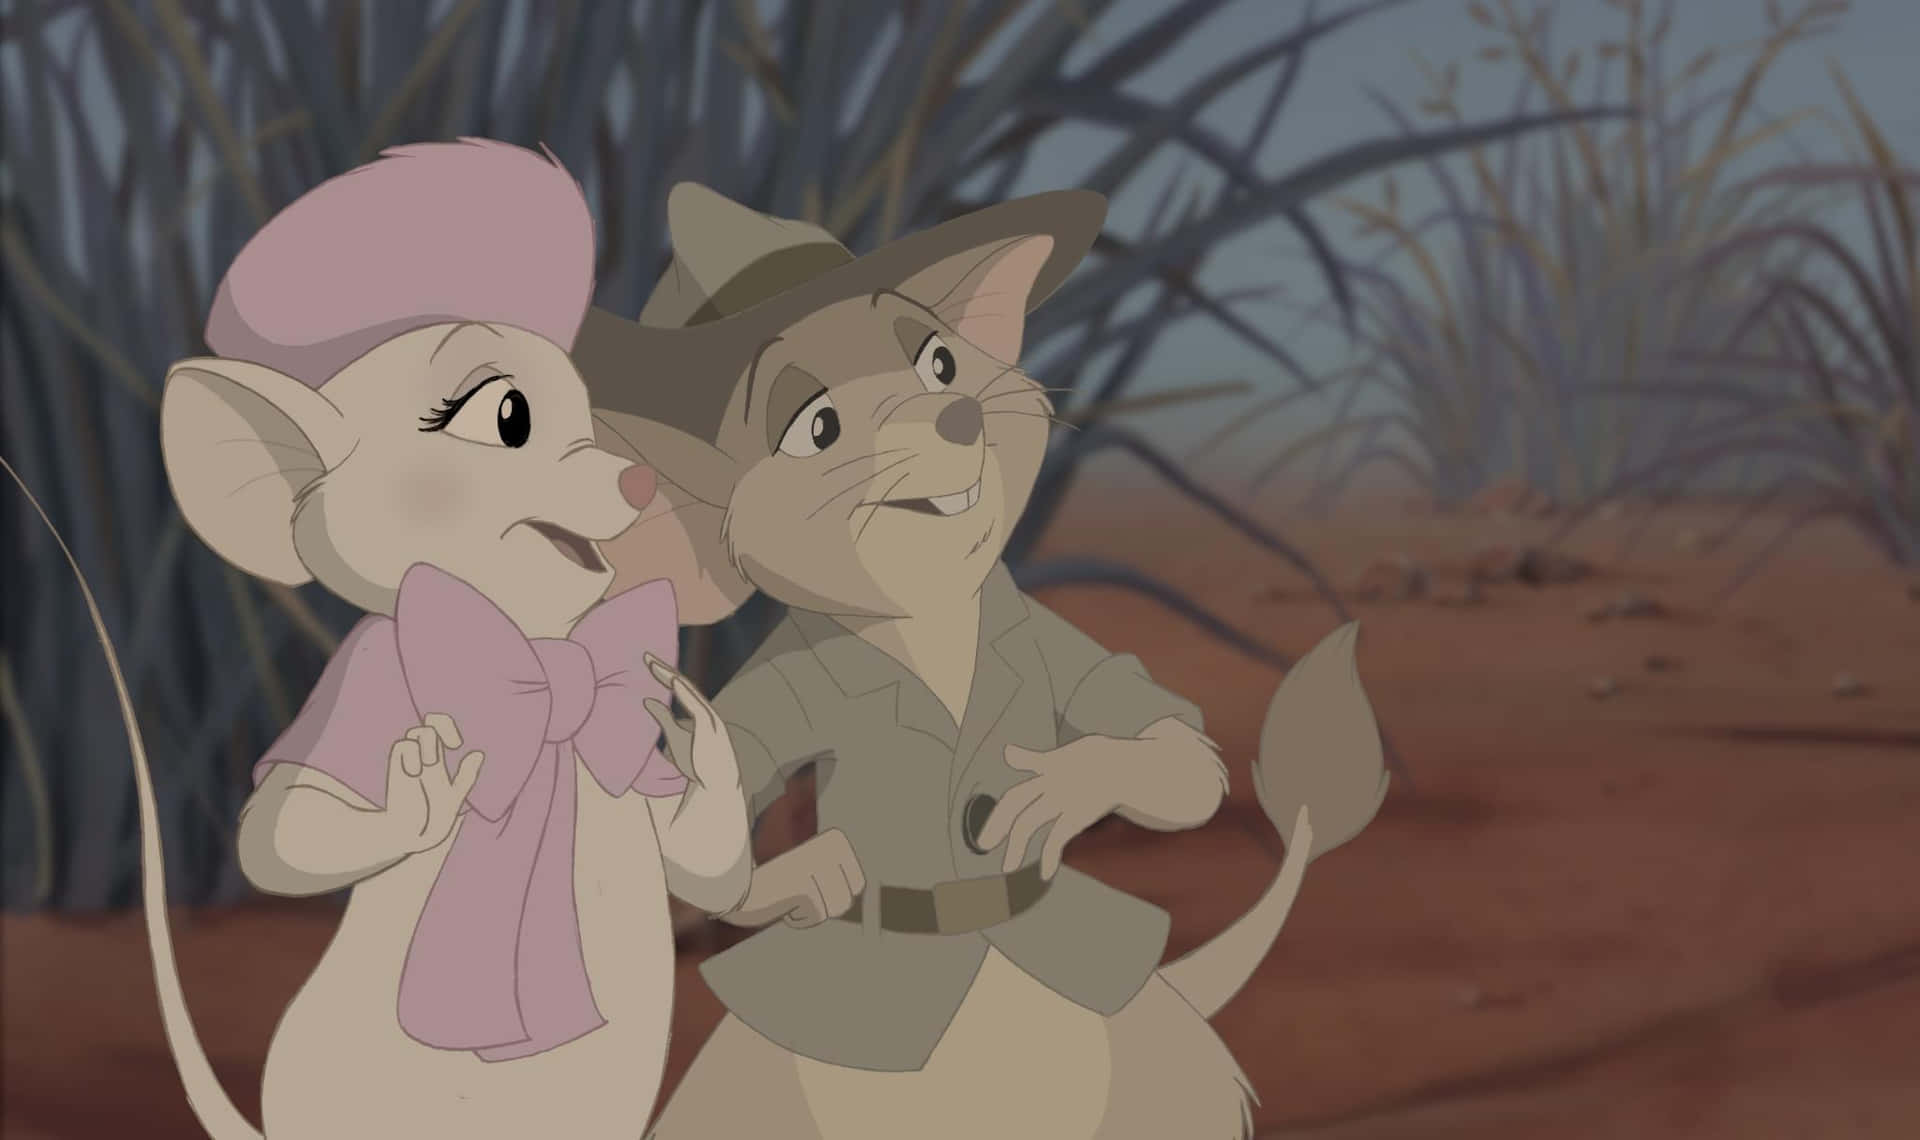 The Rescuers Down Under adventure scene with Bernard, Miss Bianca, and Marahute Wallpaper